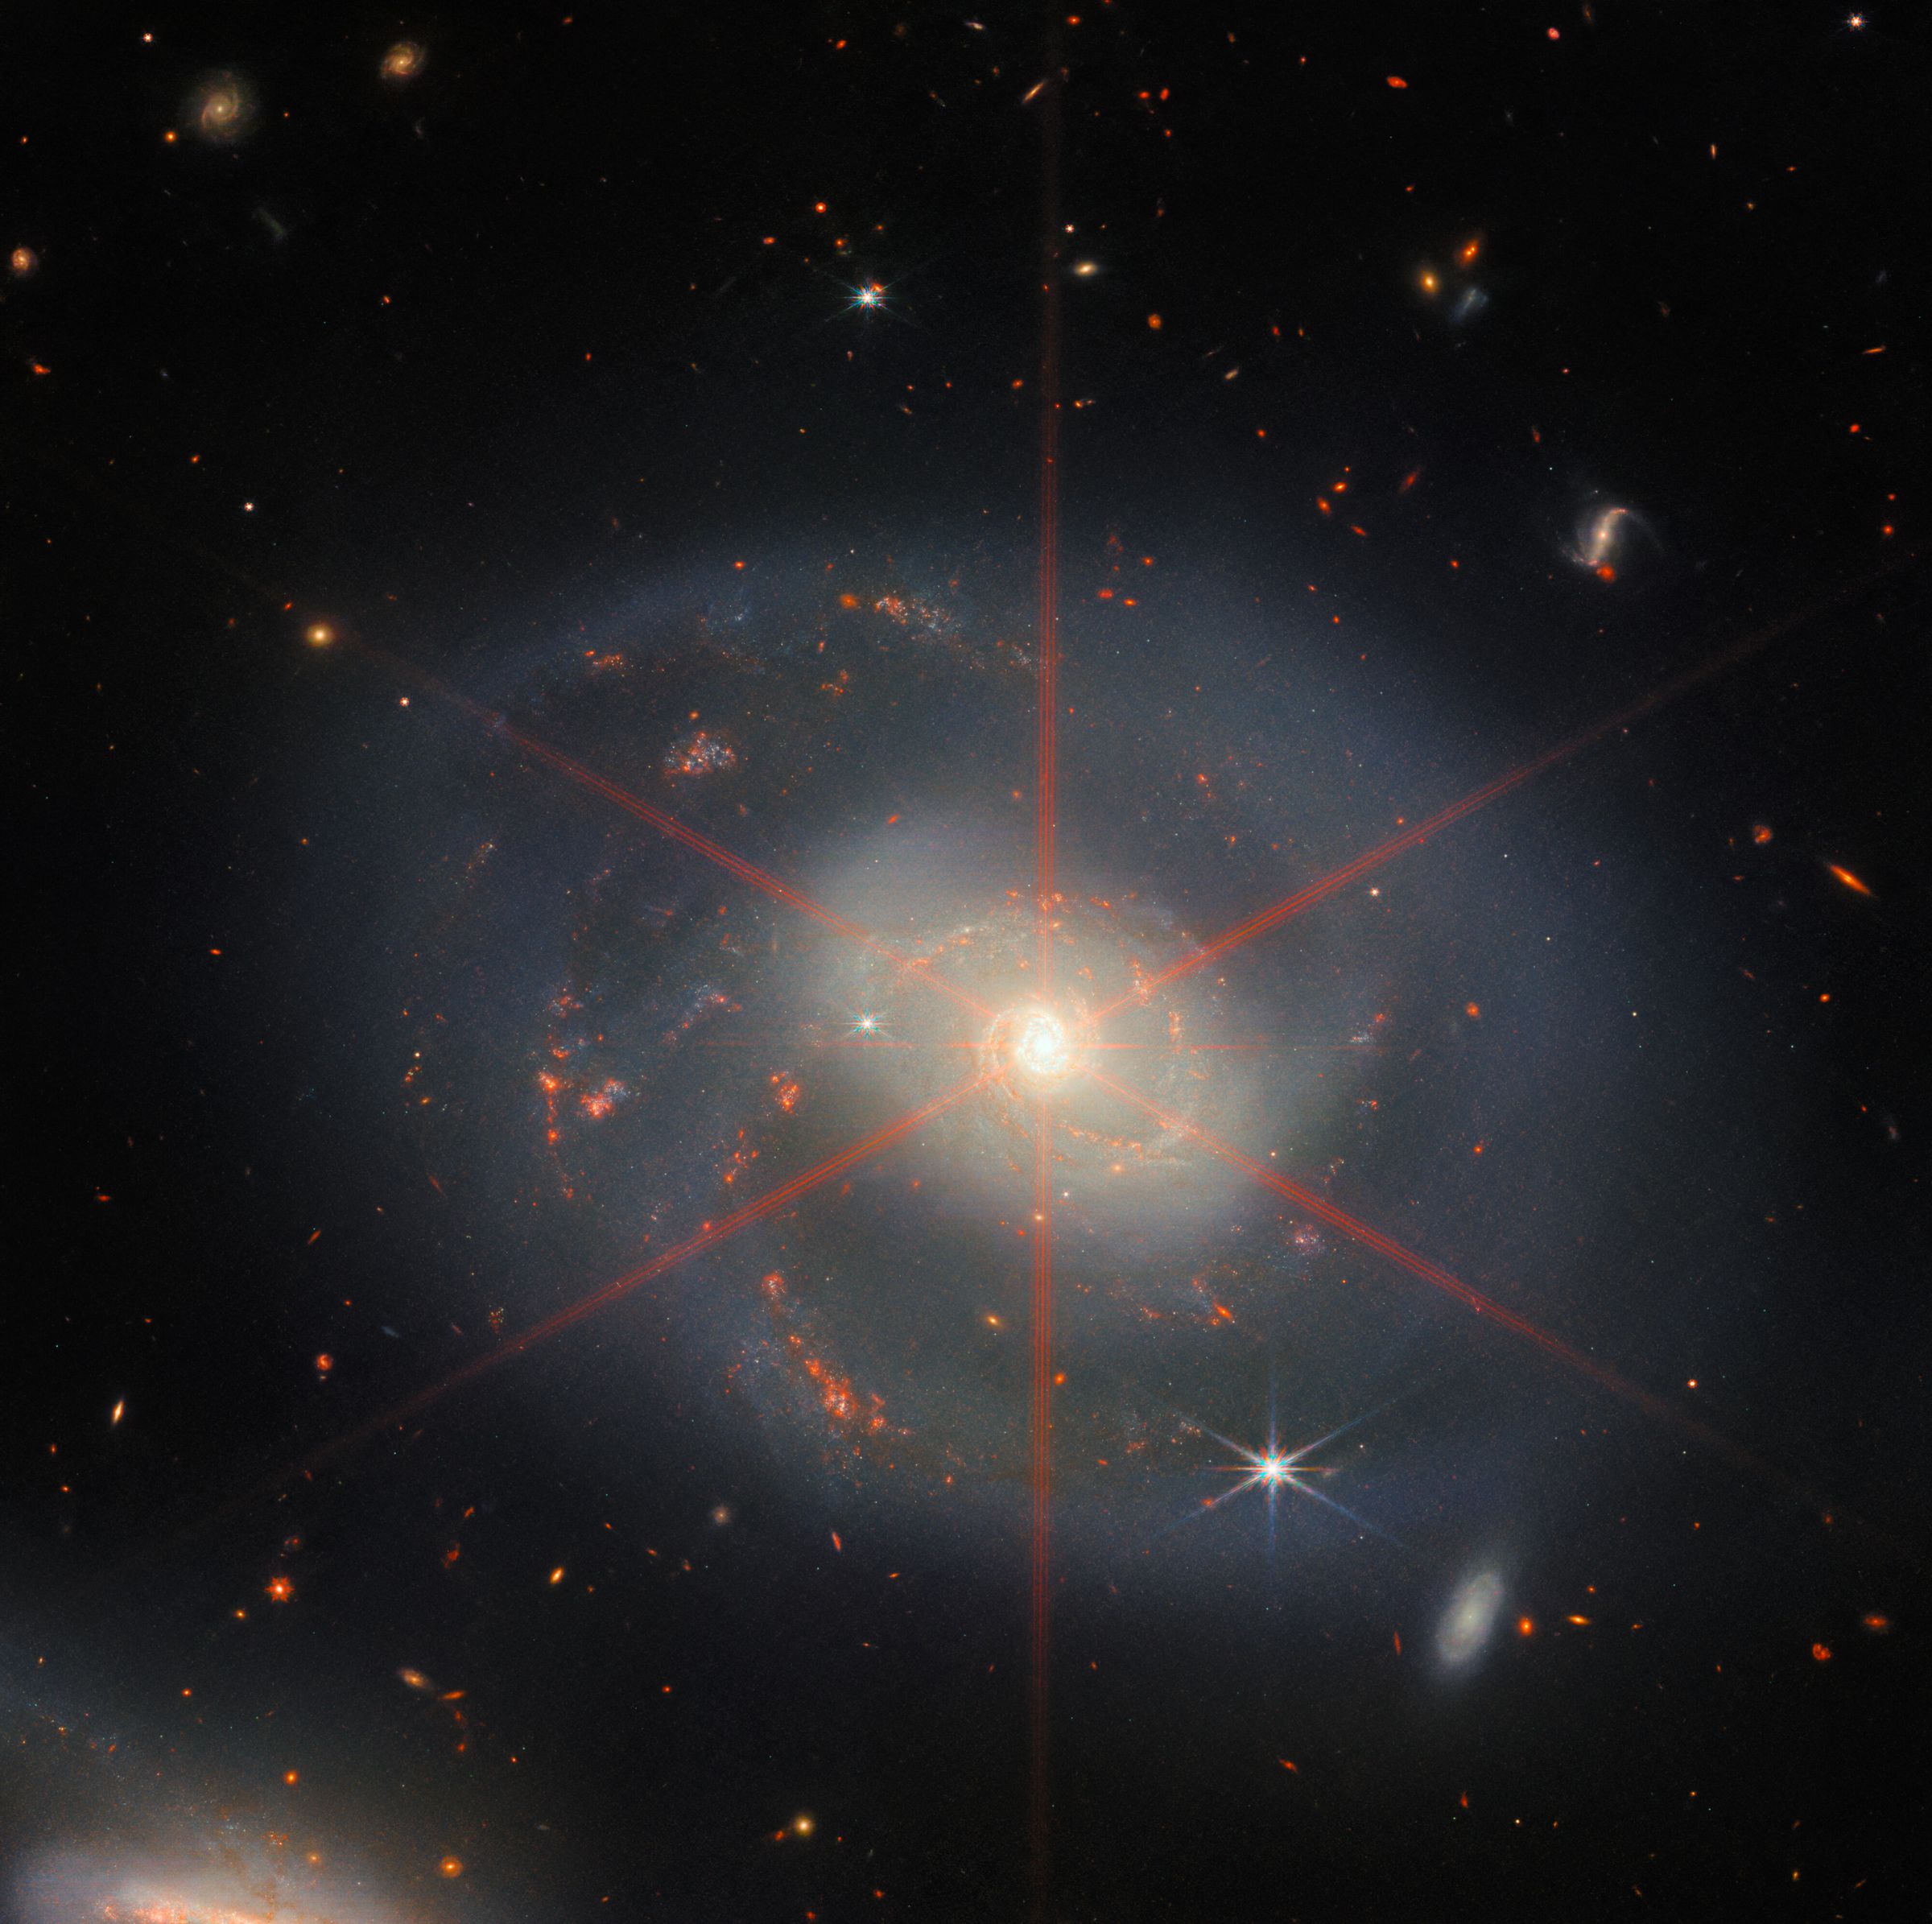 This image shows a spiral galaxy dominated by a bright central region. The galaxy has a blue-purple hue, with orangy-red regions filled with stars. Also visible is a large diffraction spike, appearing as a pattern of stars over the central region of the galaxy.Many stars and galaxies fill the background